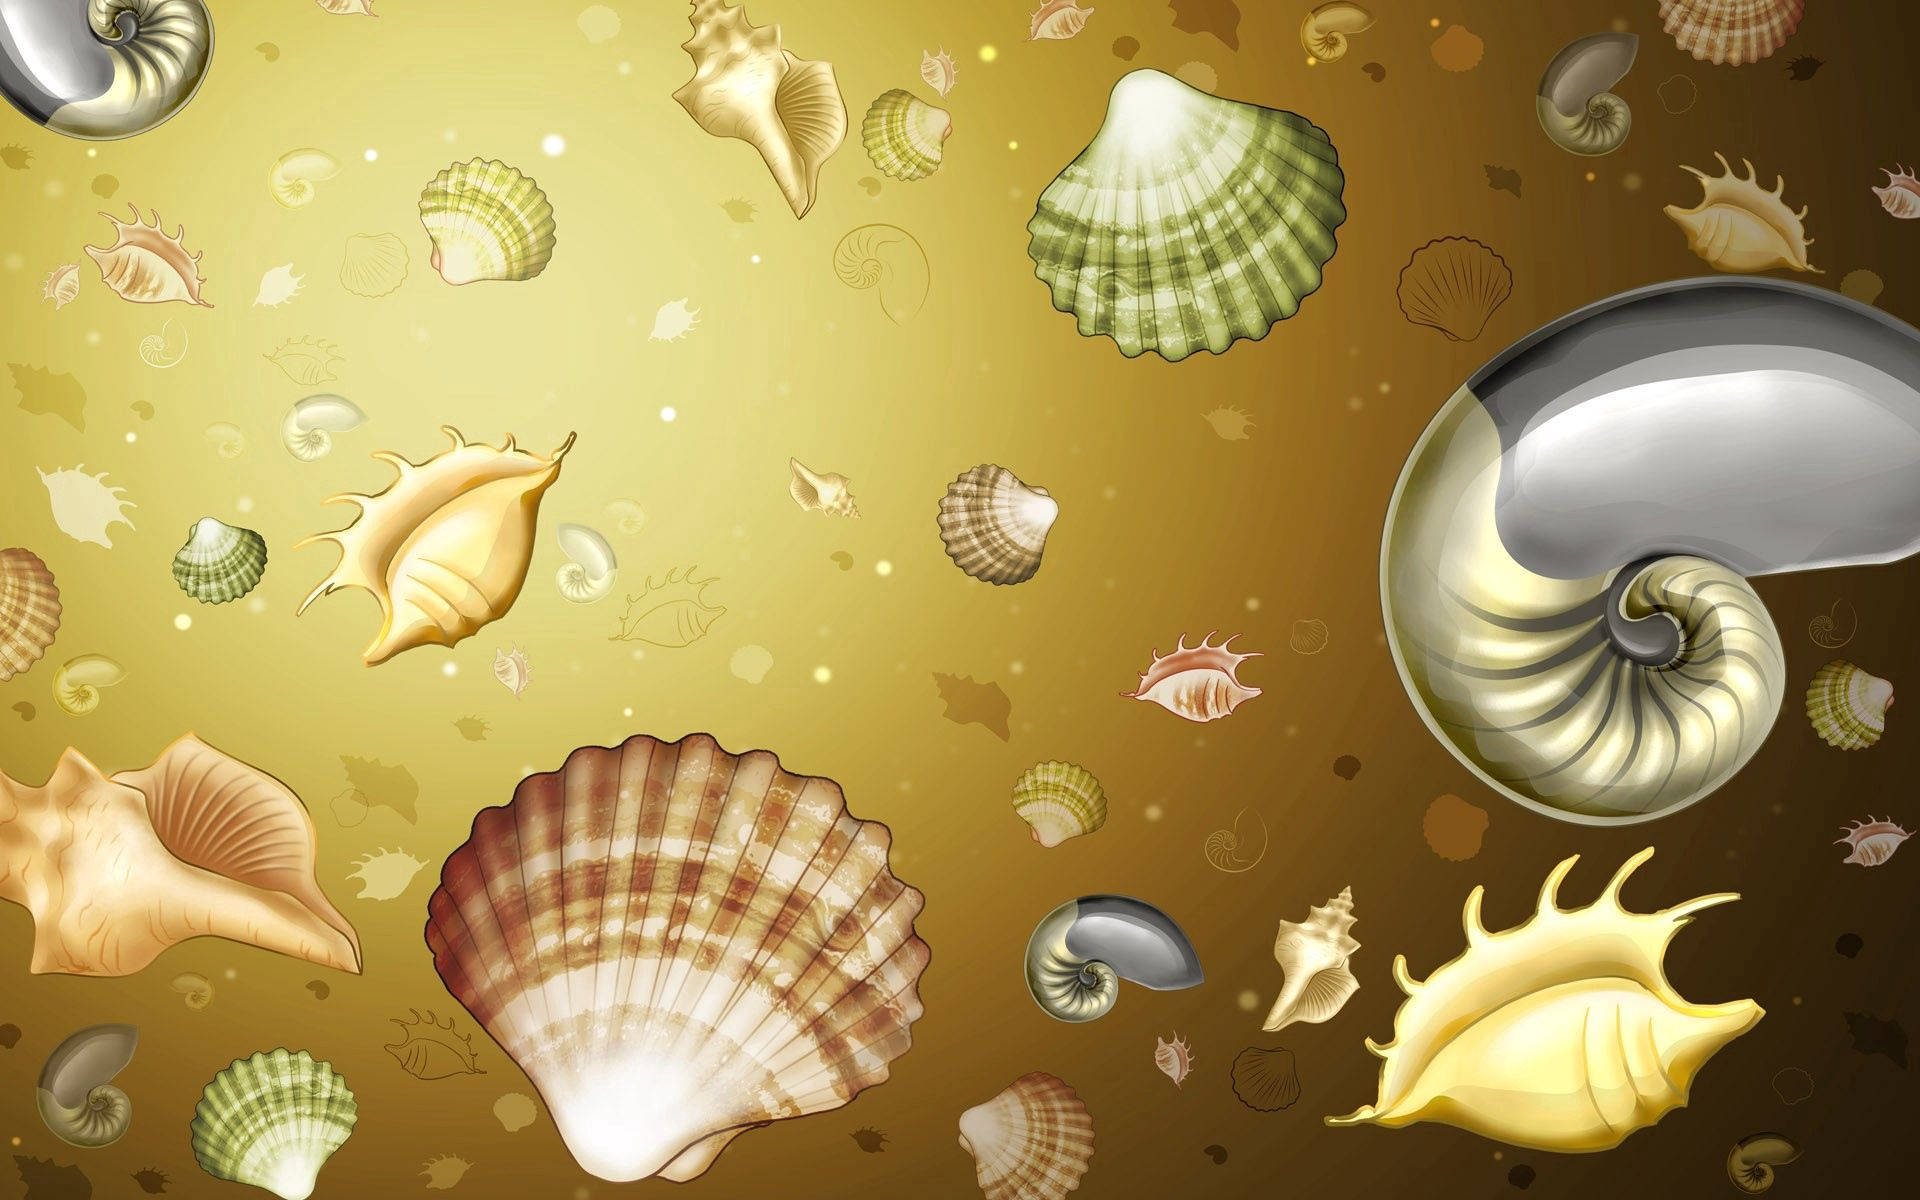 Get Lost In A Visual Odyssey Of Animated Shells